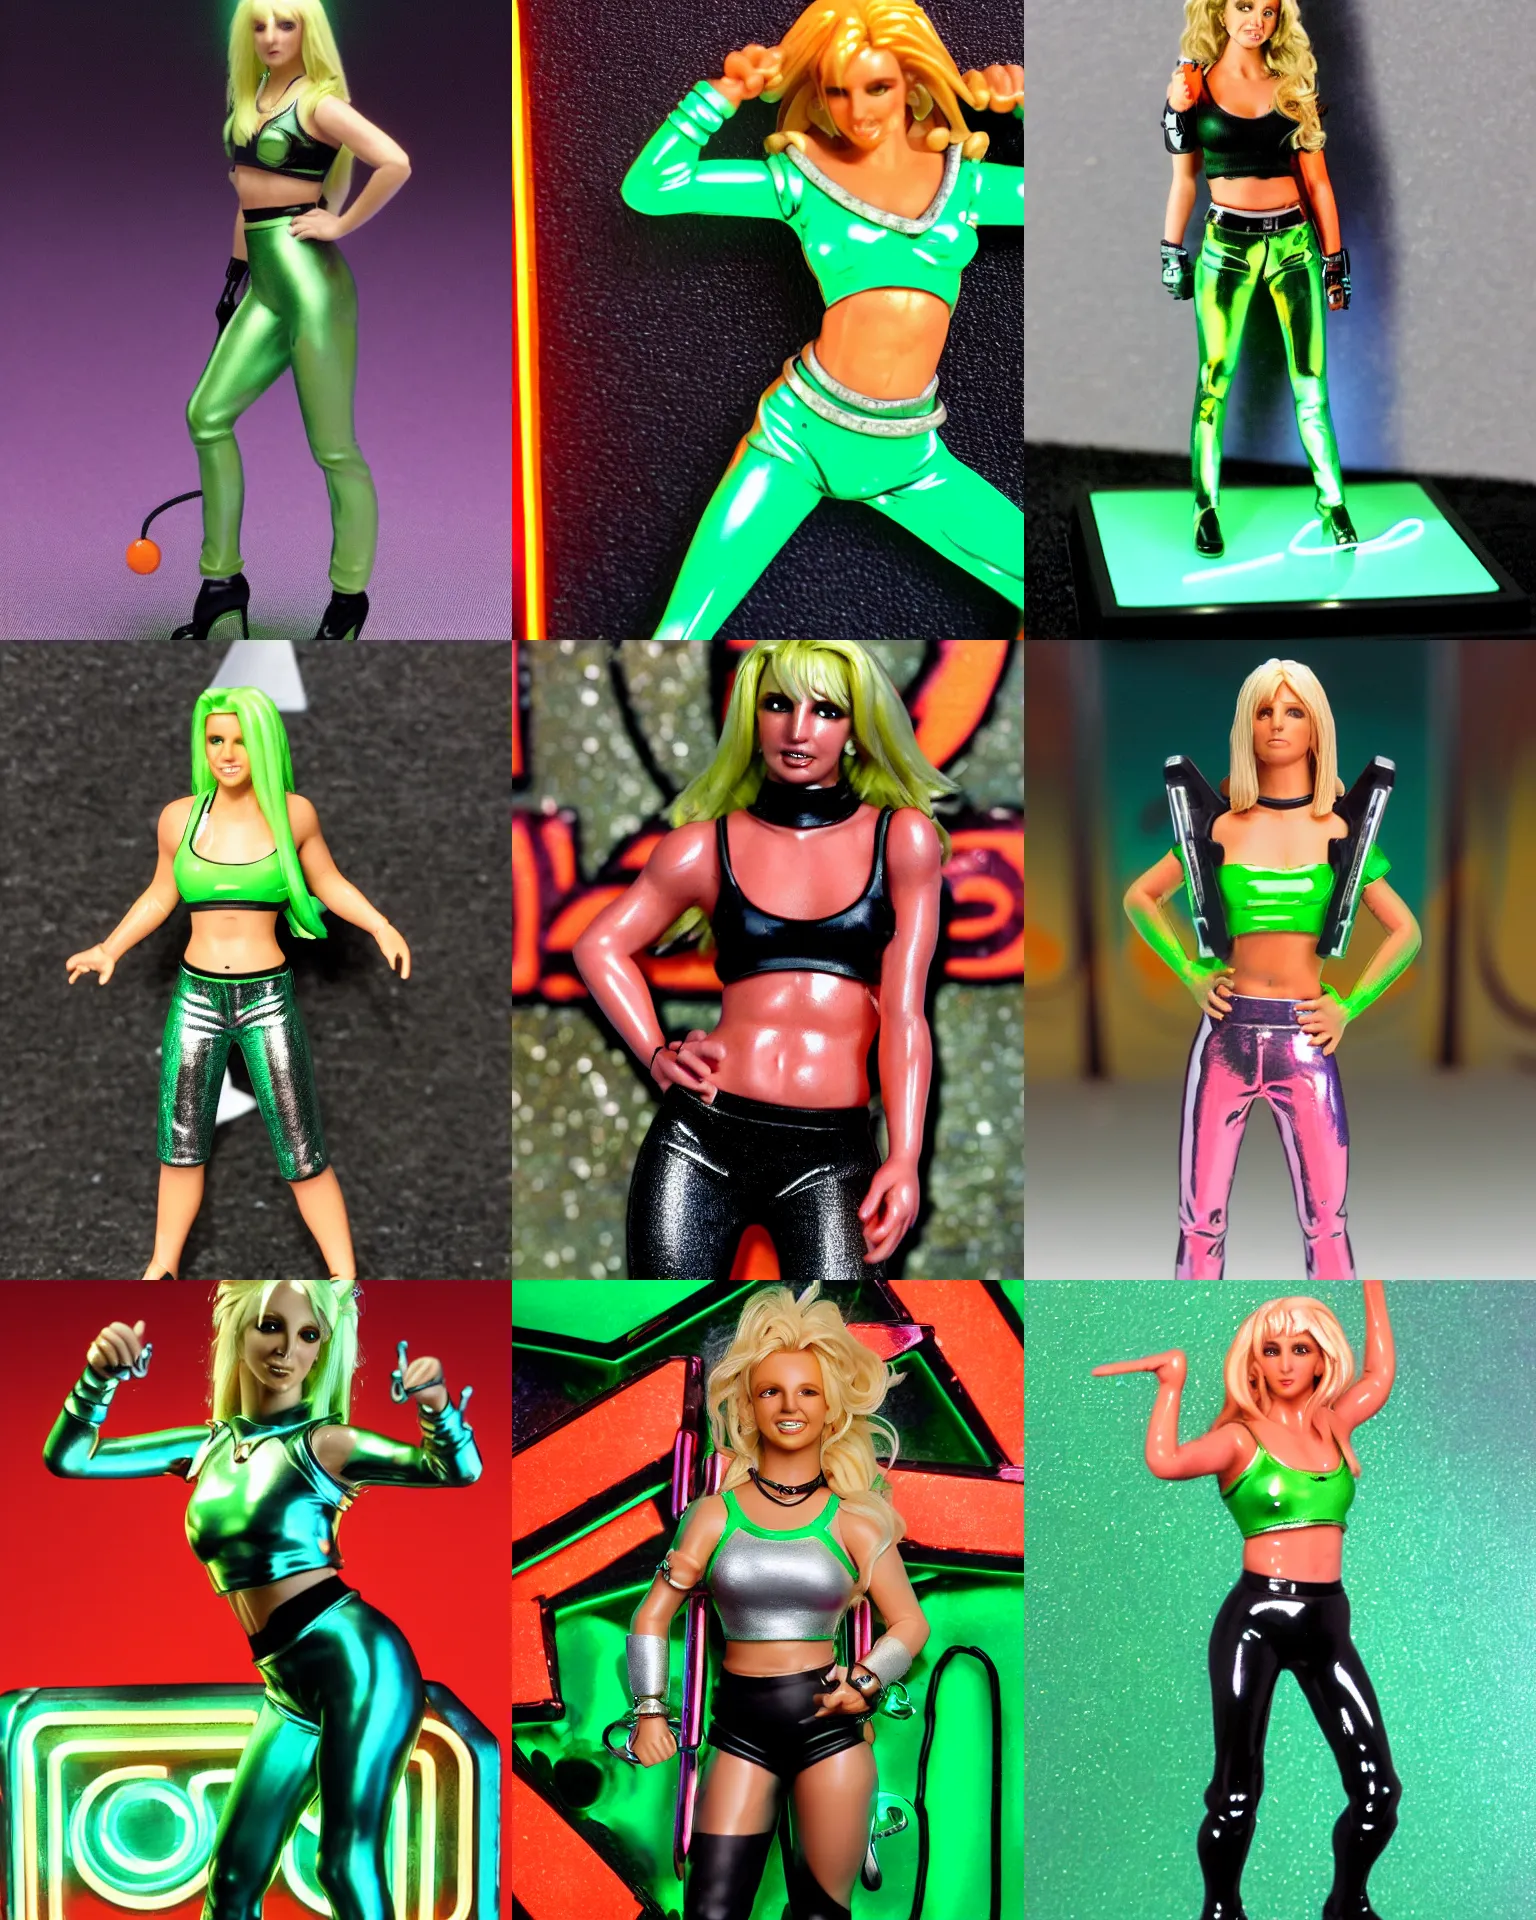 Prompt: HD photo of a Scifi Fantasy Britney Spears with wavy blonde hair in a square-cut neckline metallic green crop top and black leggings in front of an orange neon sign. (You Drive Me) Crazy music video 1999. Games Workshop miniature. D&D TTRPG Warhammer 40k mini. 25mm Heroic Scale. OSL, NMM, Citadel Colour paint, zenithal priming. 28mm round base with custom terrain.